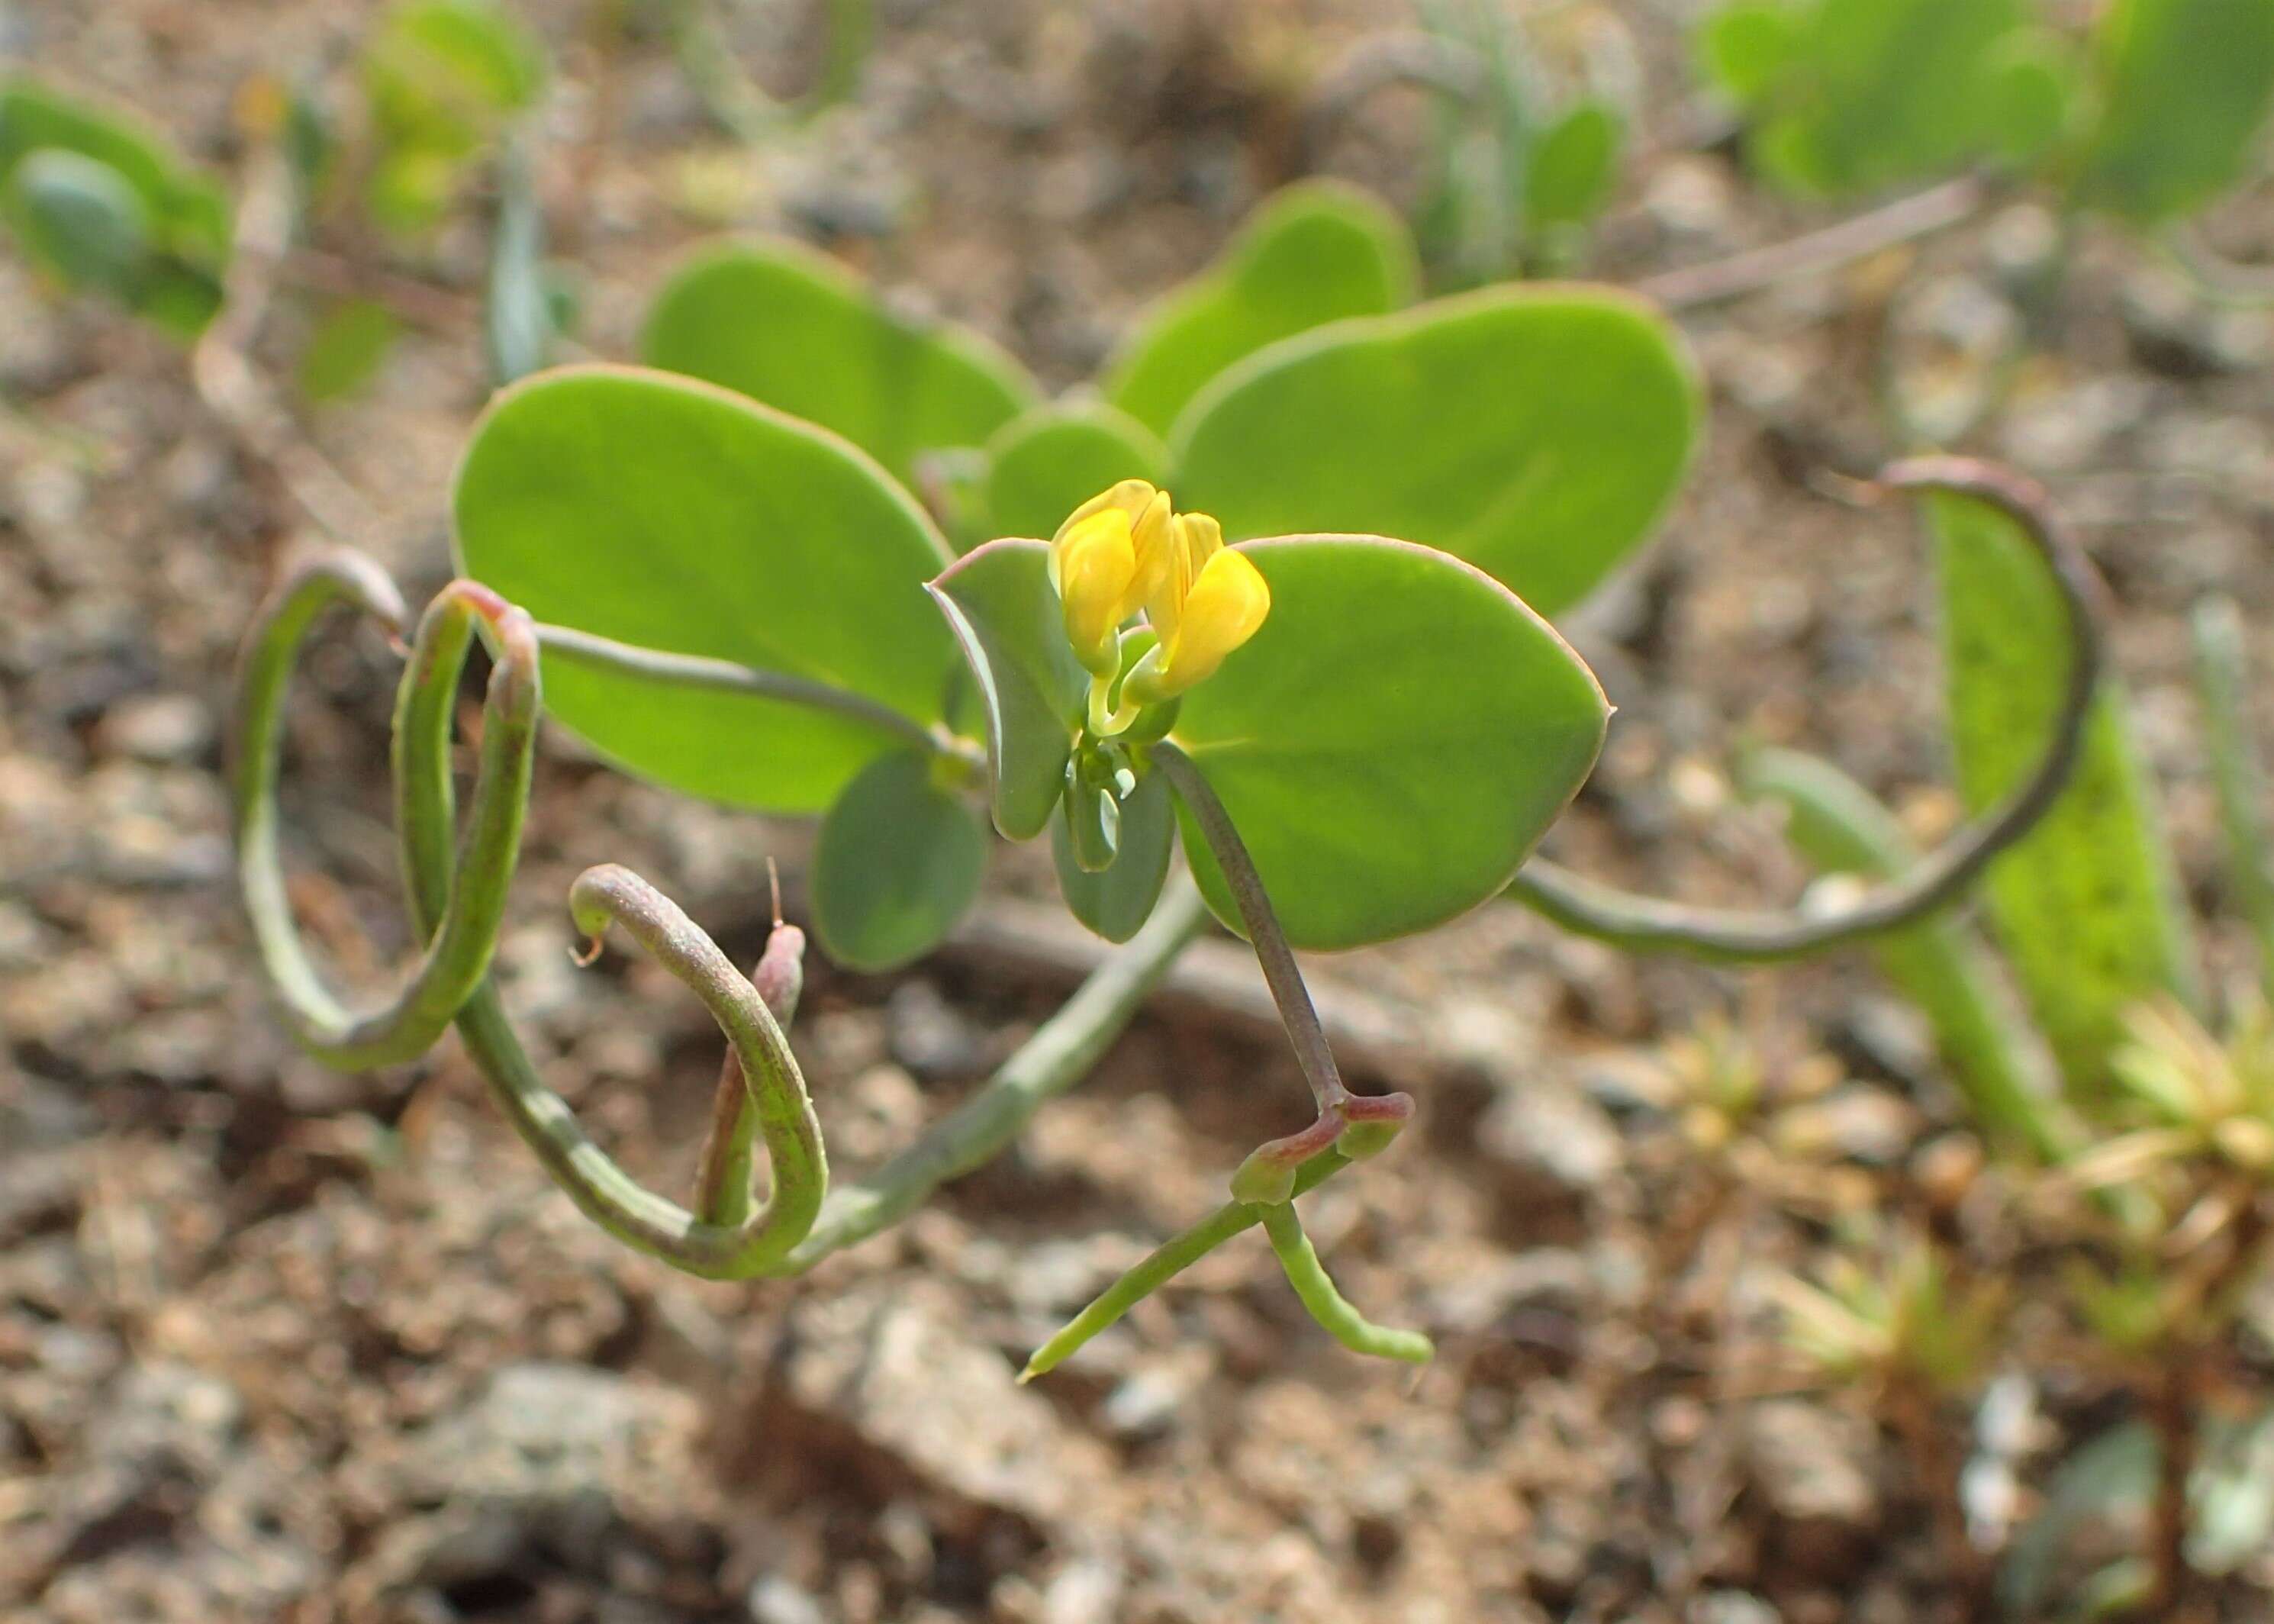 Image of yellow crownvetch